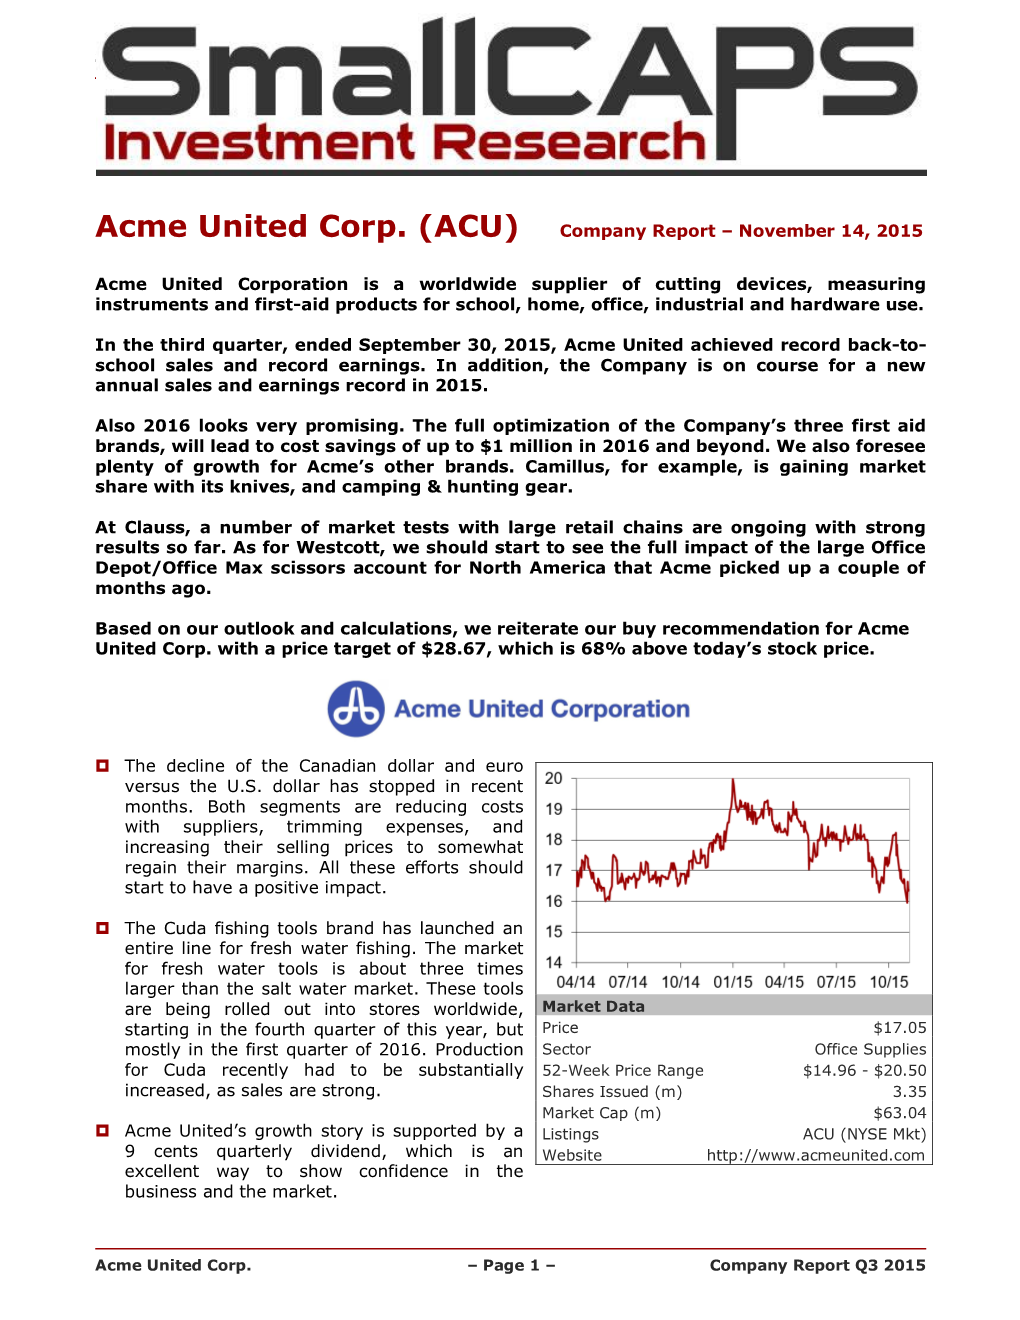 (ACU) Company Report – November 14, 2015 Acme United Corporation Is a Worldwide Supplier of Cutting Devices